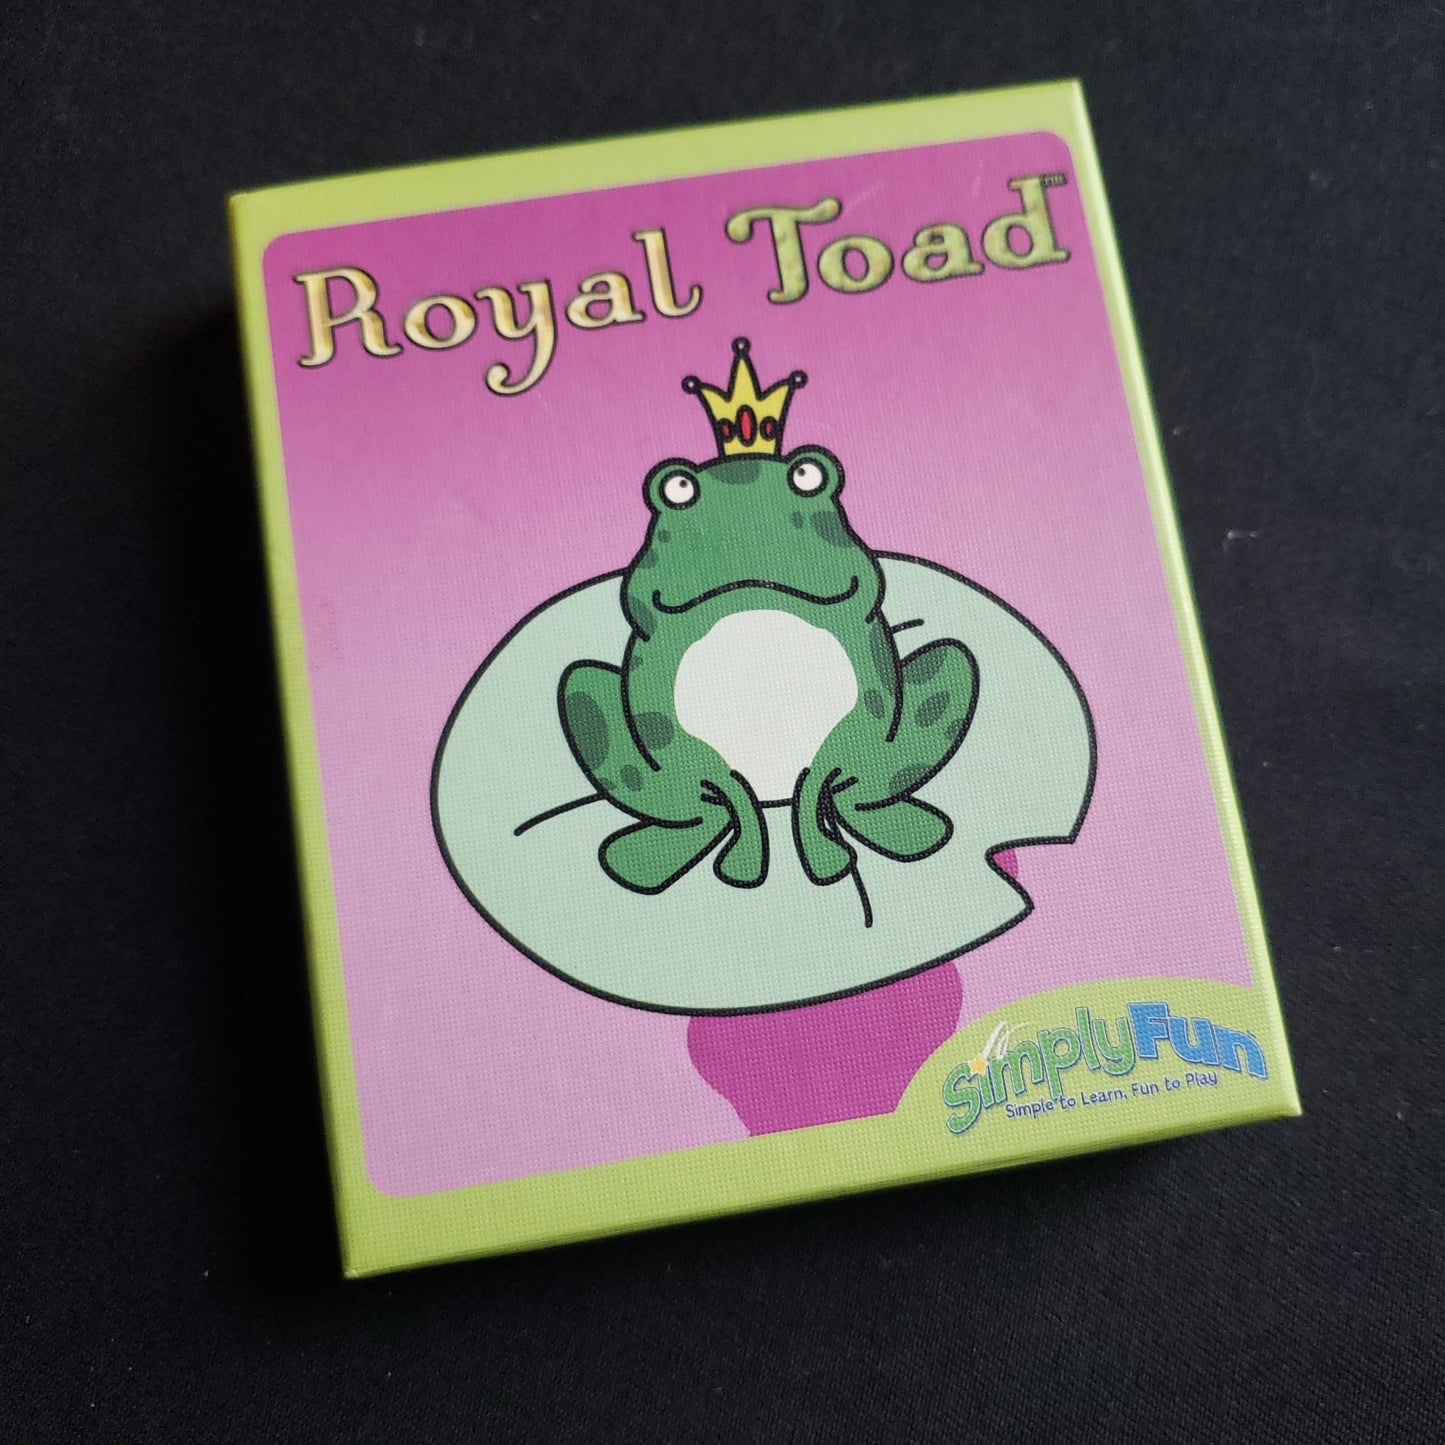 Image shows the front cover of the box of the Royal Toad card game